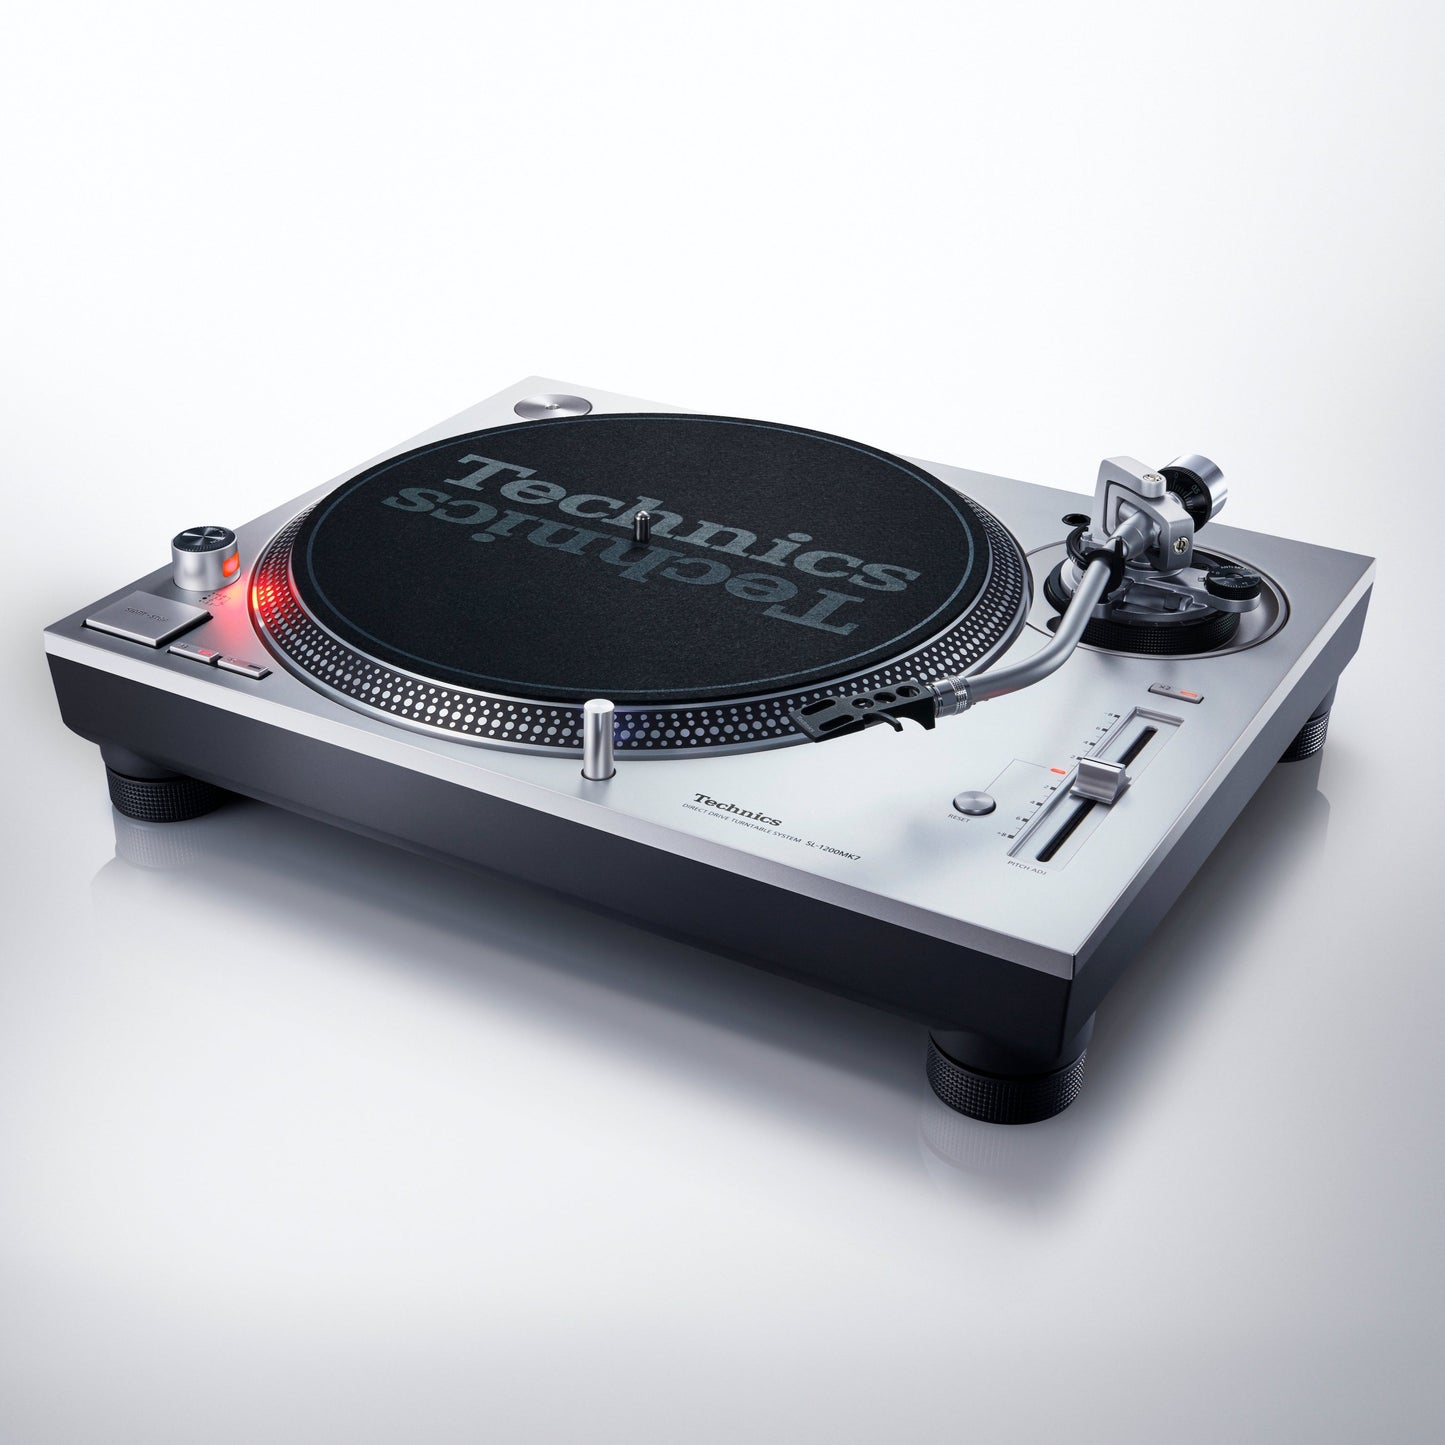 Technics SL-1200MK7S Direct Drive Turntable (Silver Edition) with FREE Oyaide d+ Turntable RCA cable